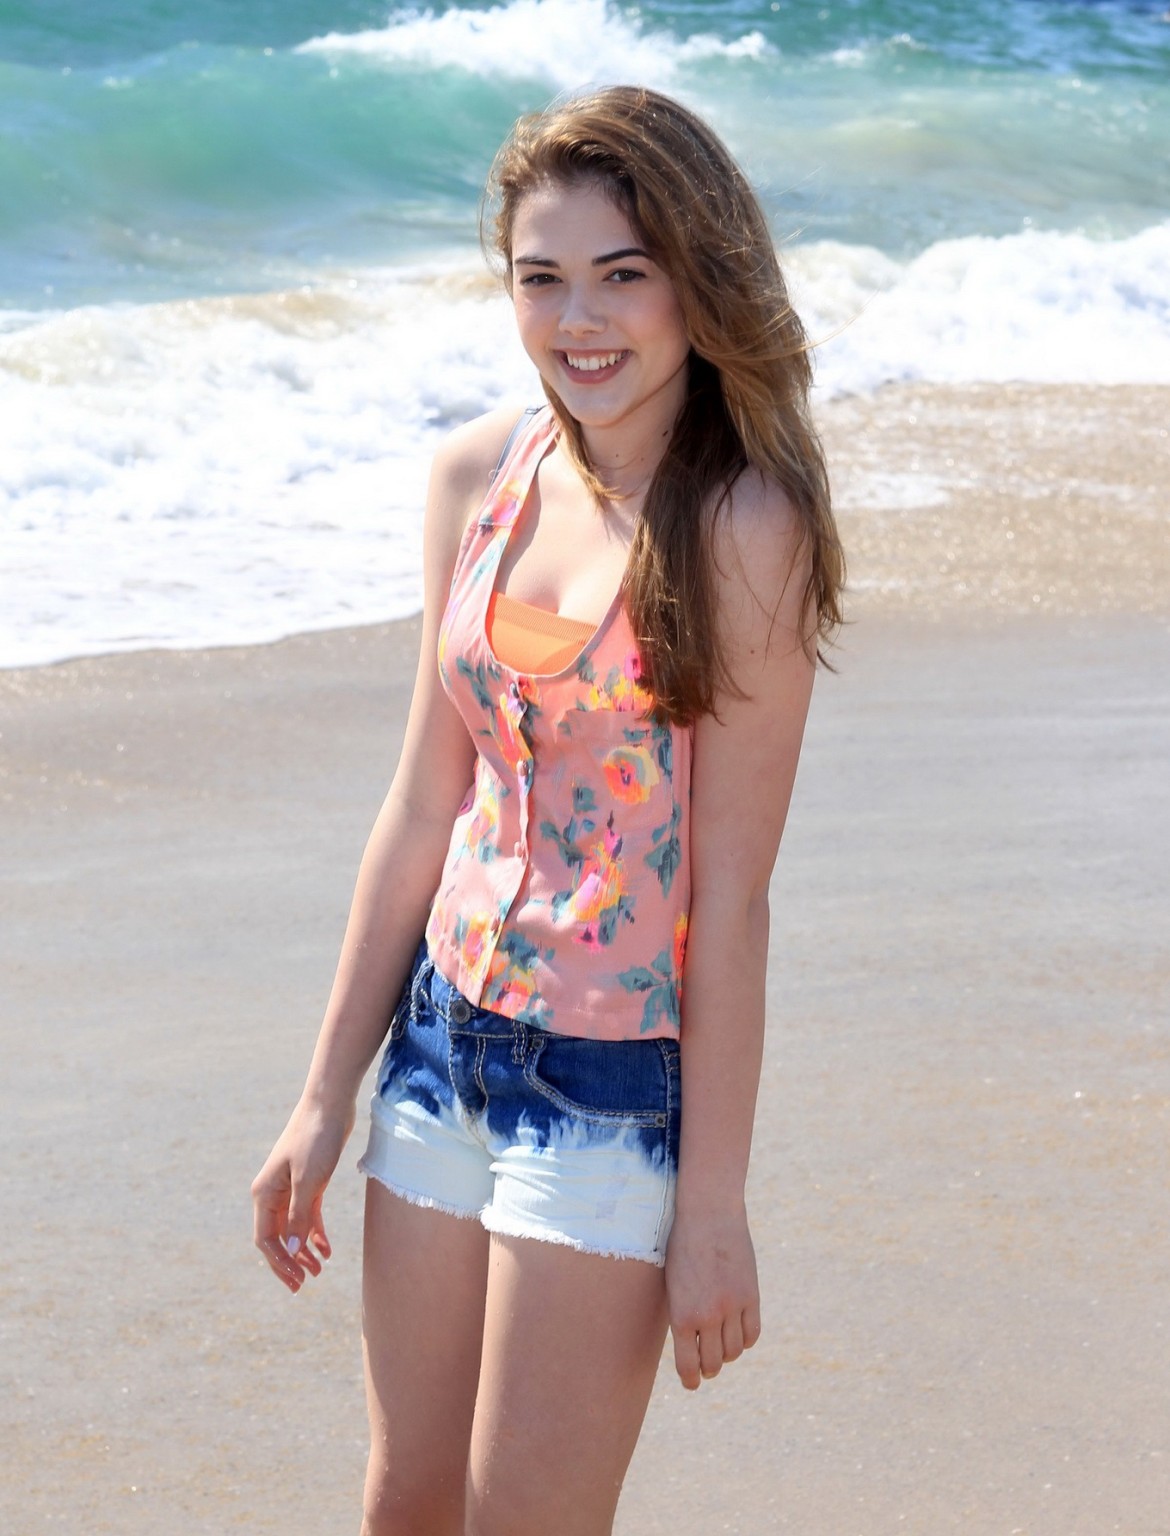 McKaley Miller wearing skimpy top and denim shorts at the beach in Los Angeles #75194396